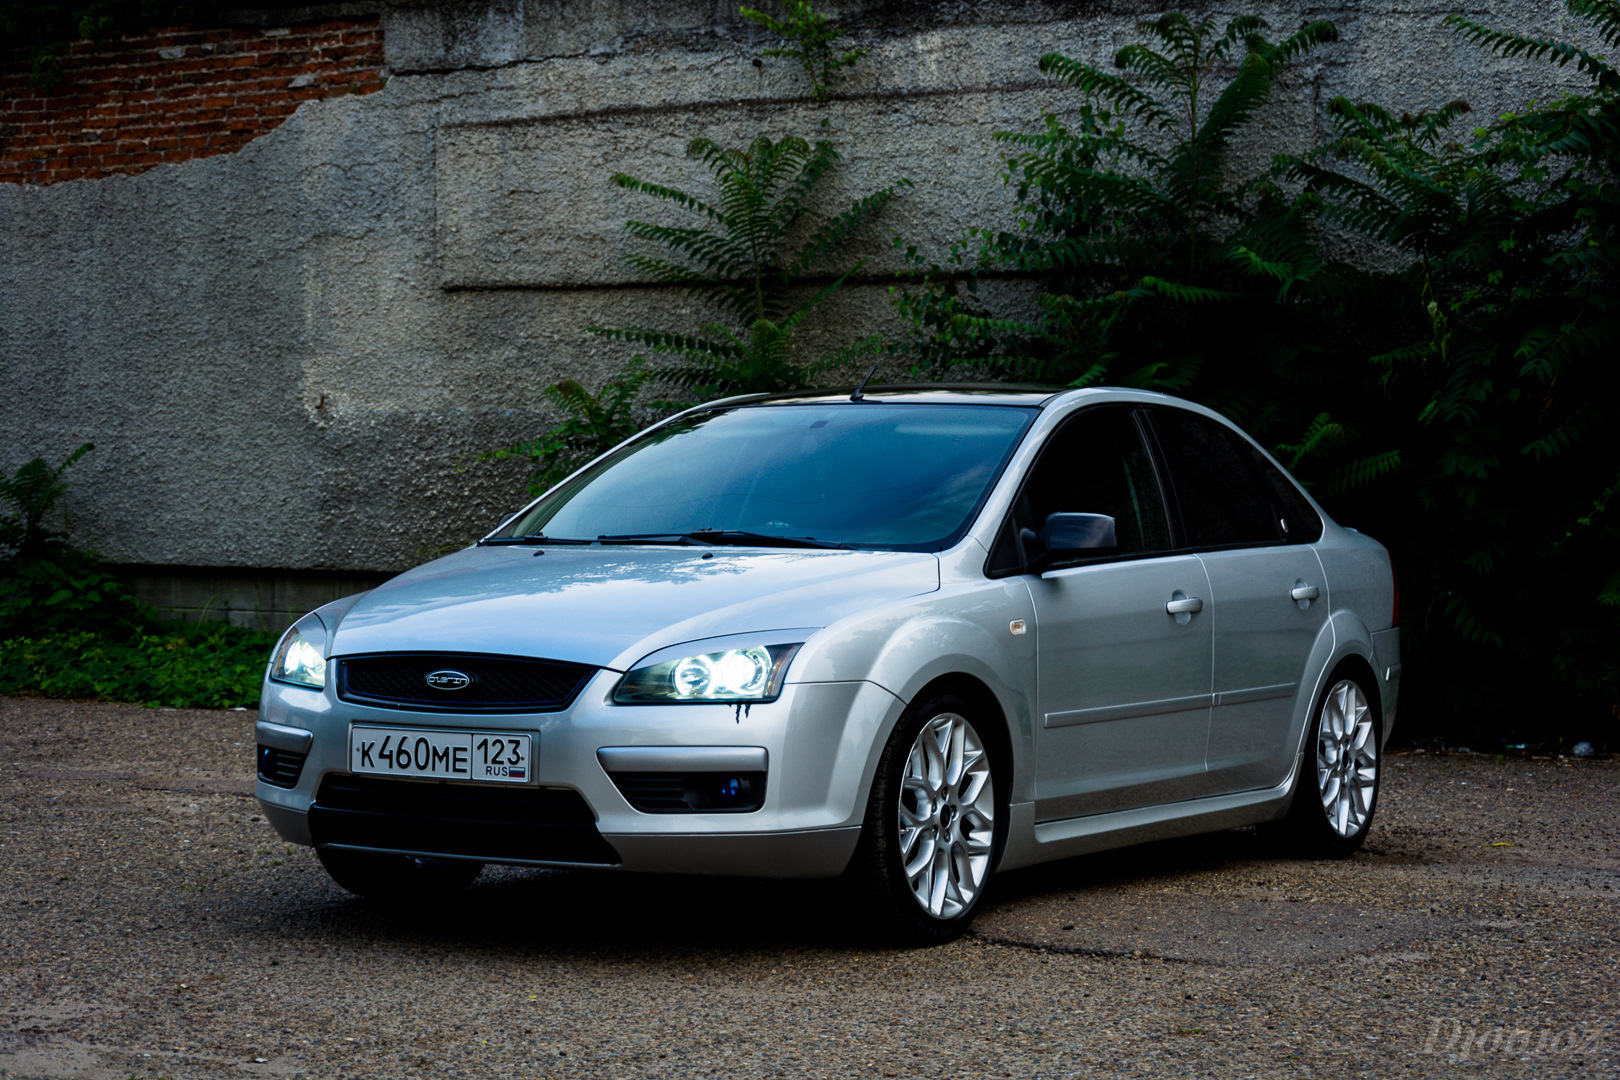 Тест форд фокус 2. Ford Focus 2. Ford Focus 2 седан. Ford Focus 2 St седан. Форд фокус 2 2005 седан.